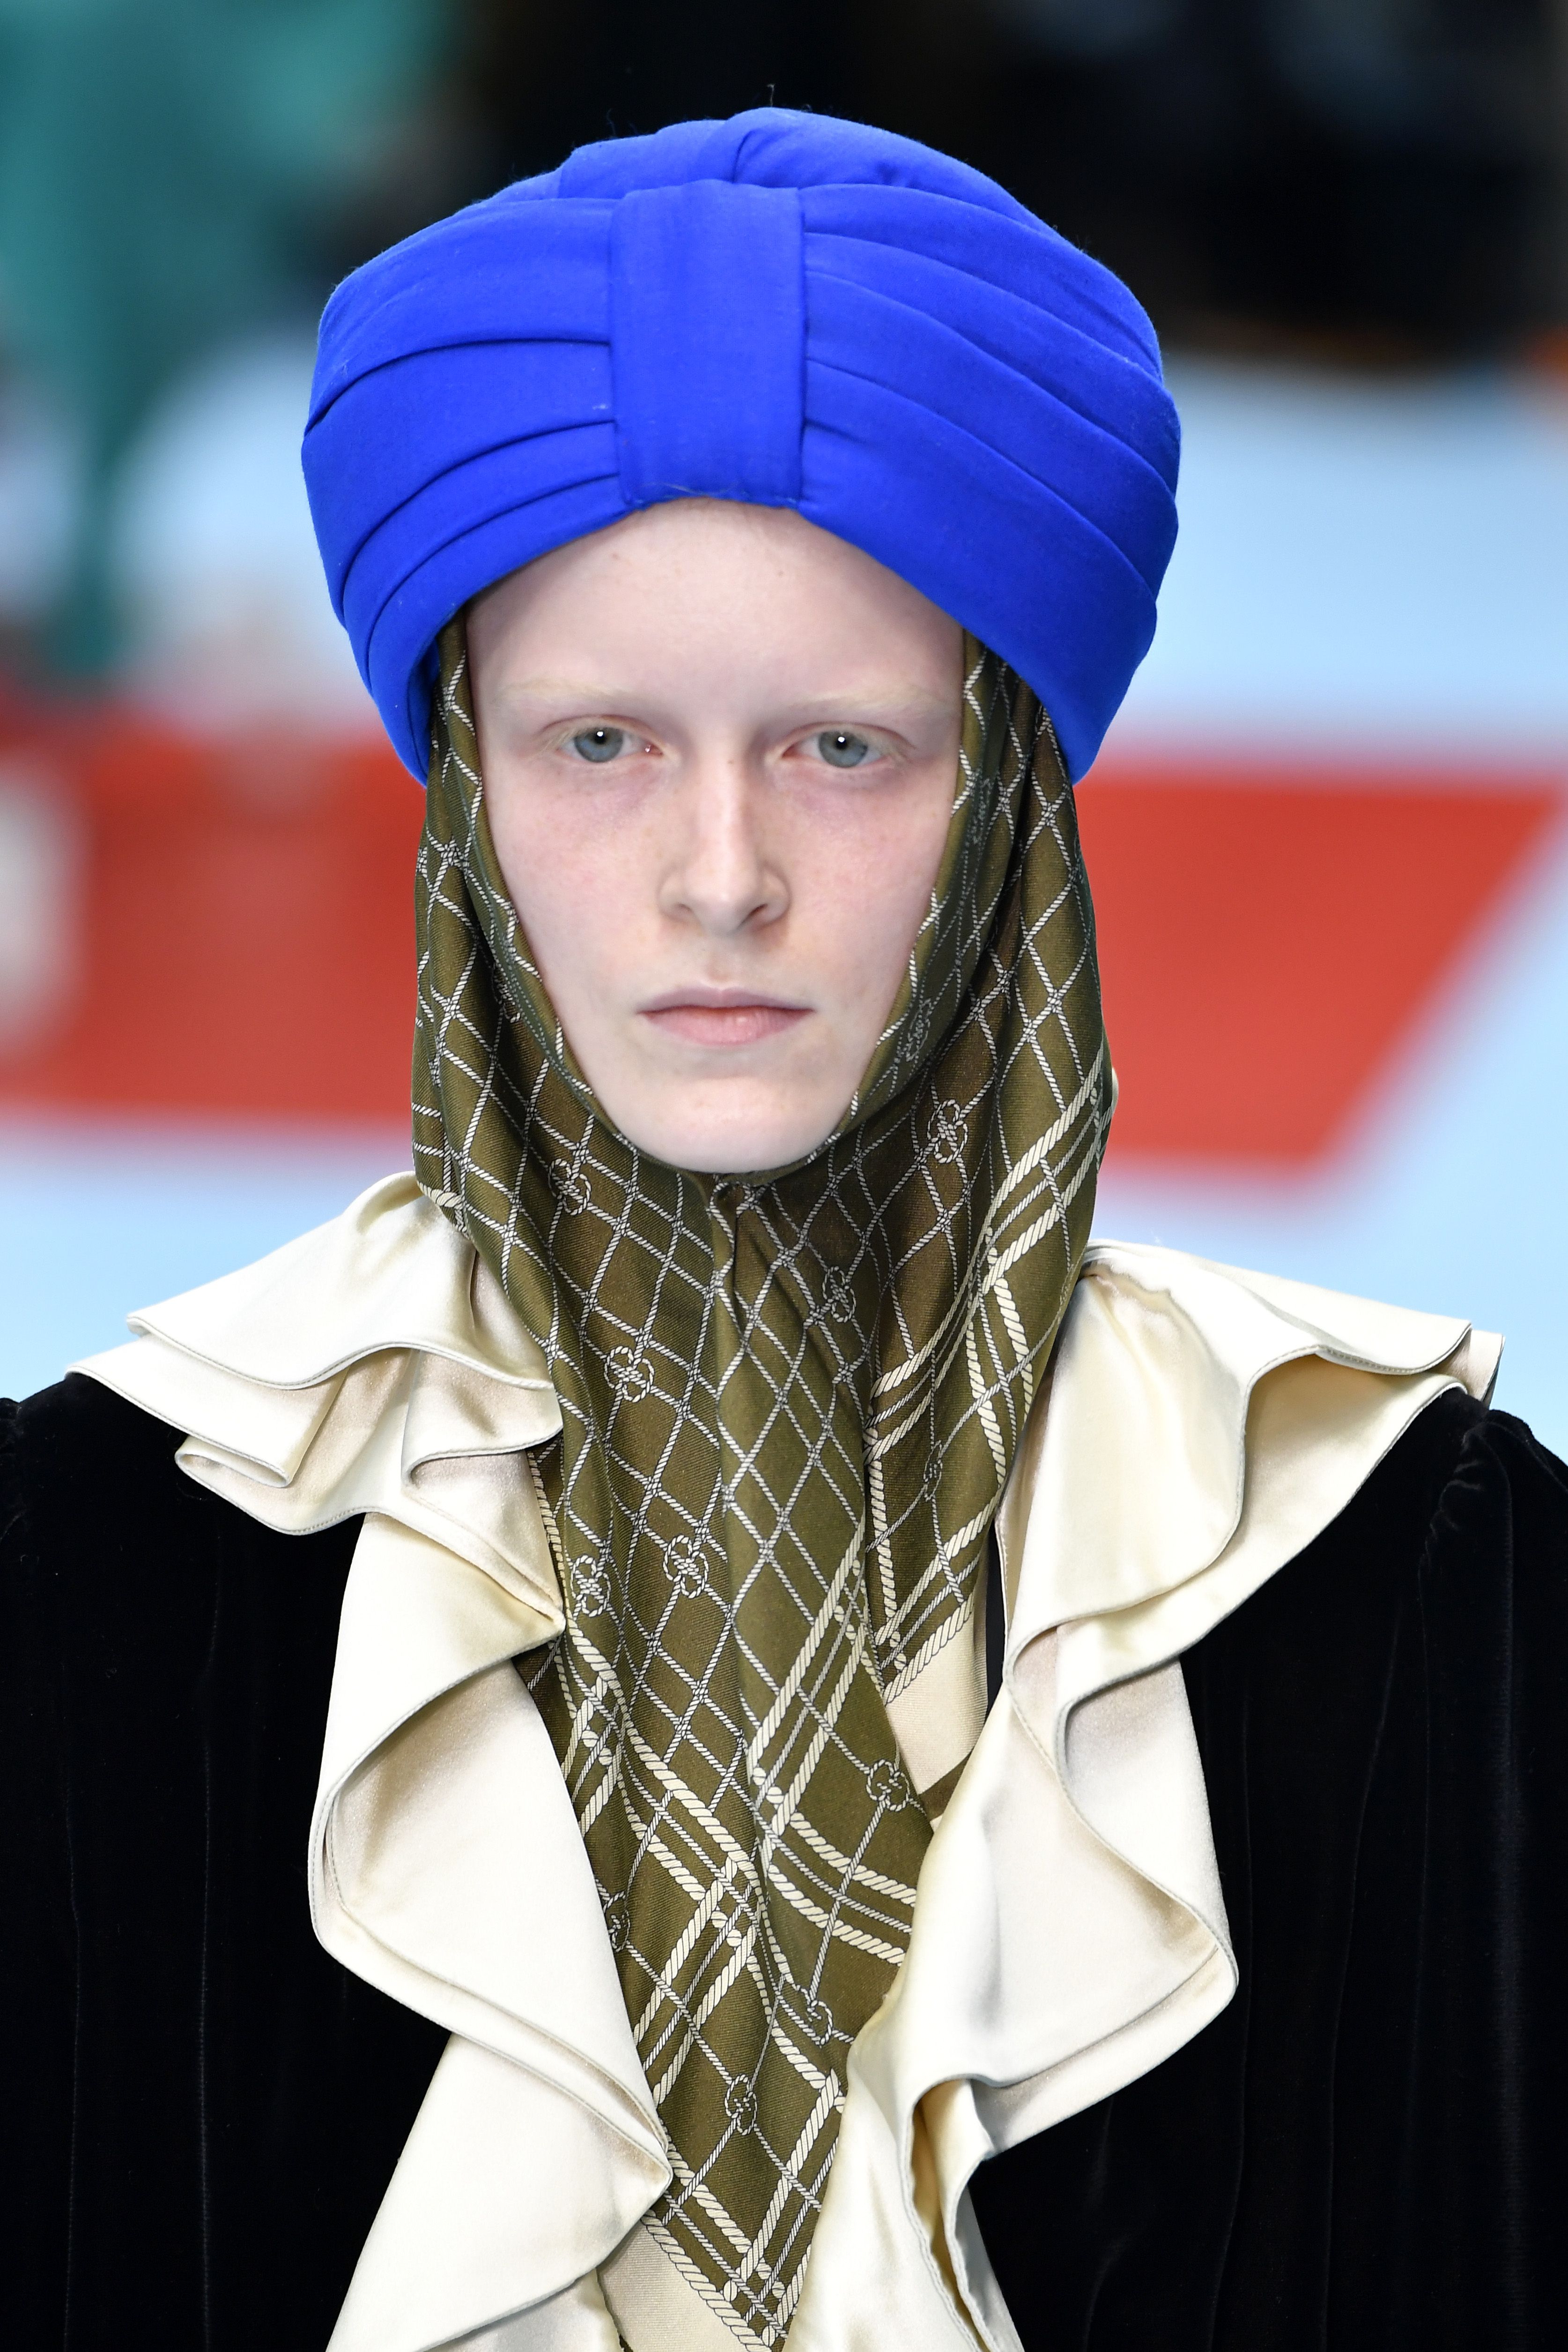 Gucci Is Facing Backlash for Selling $790 Turban